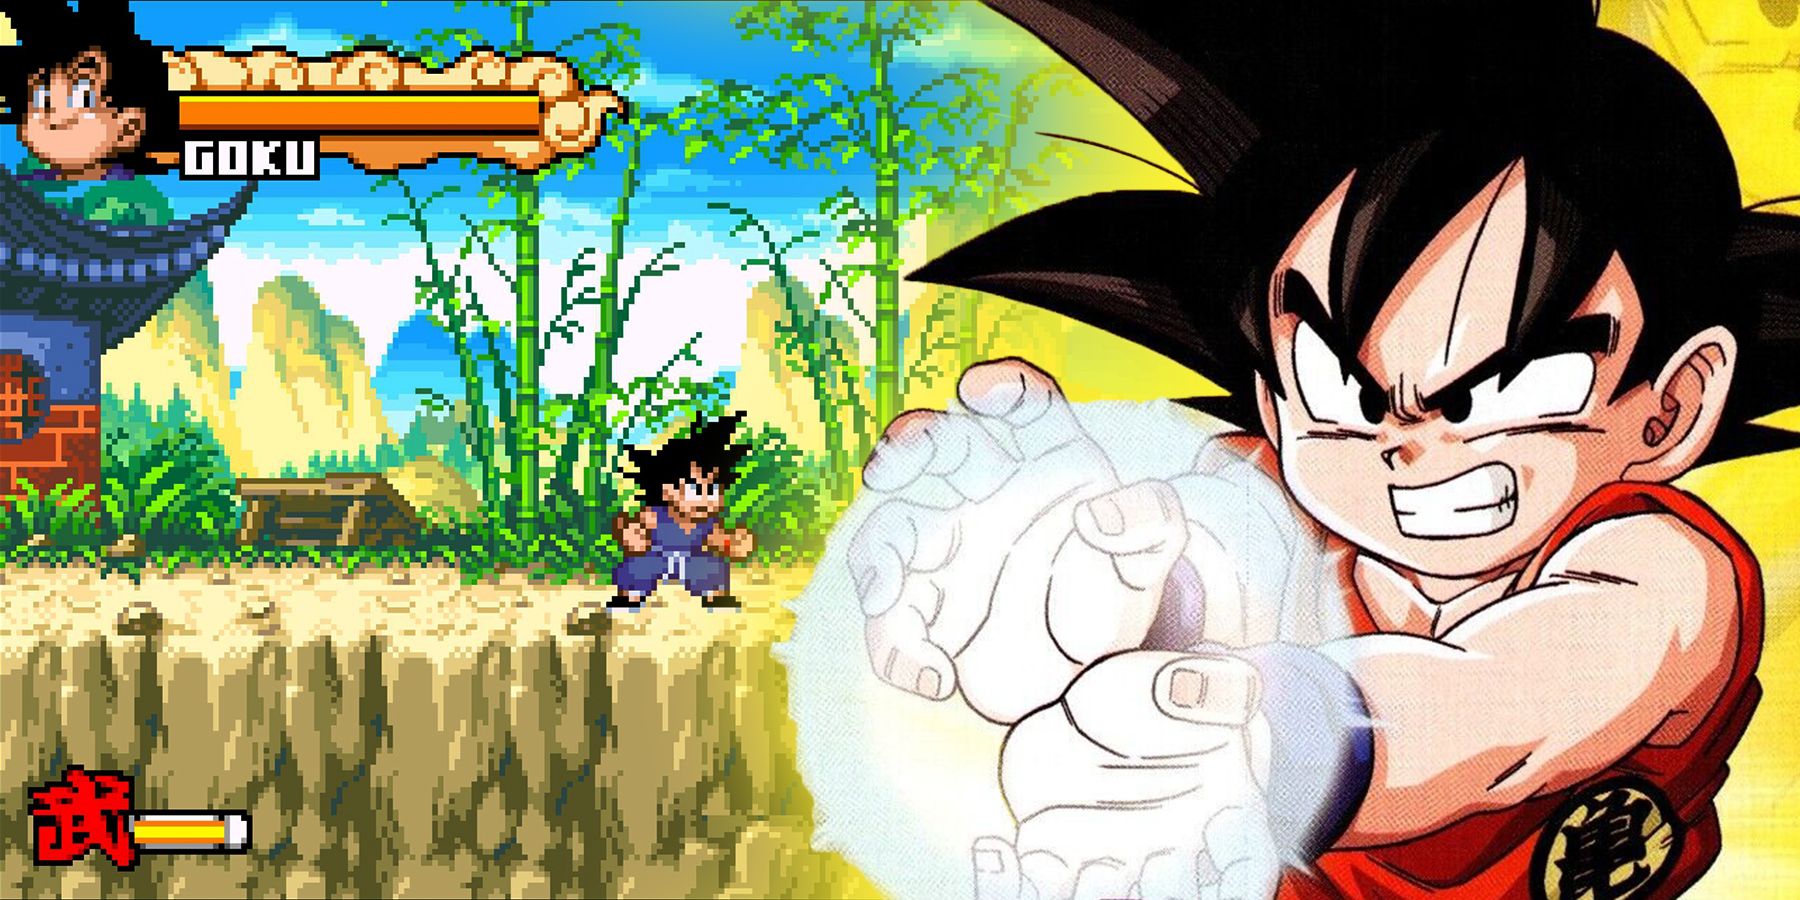 A screenshot and cover art from game 'Dragon Ball Advanced: Adventure'.